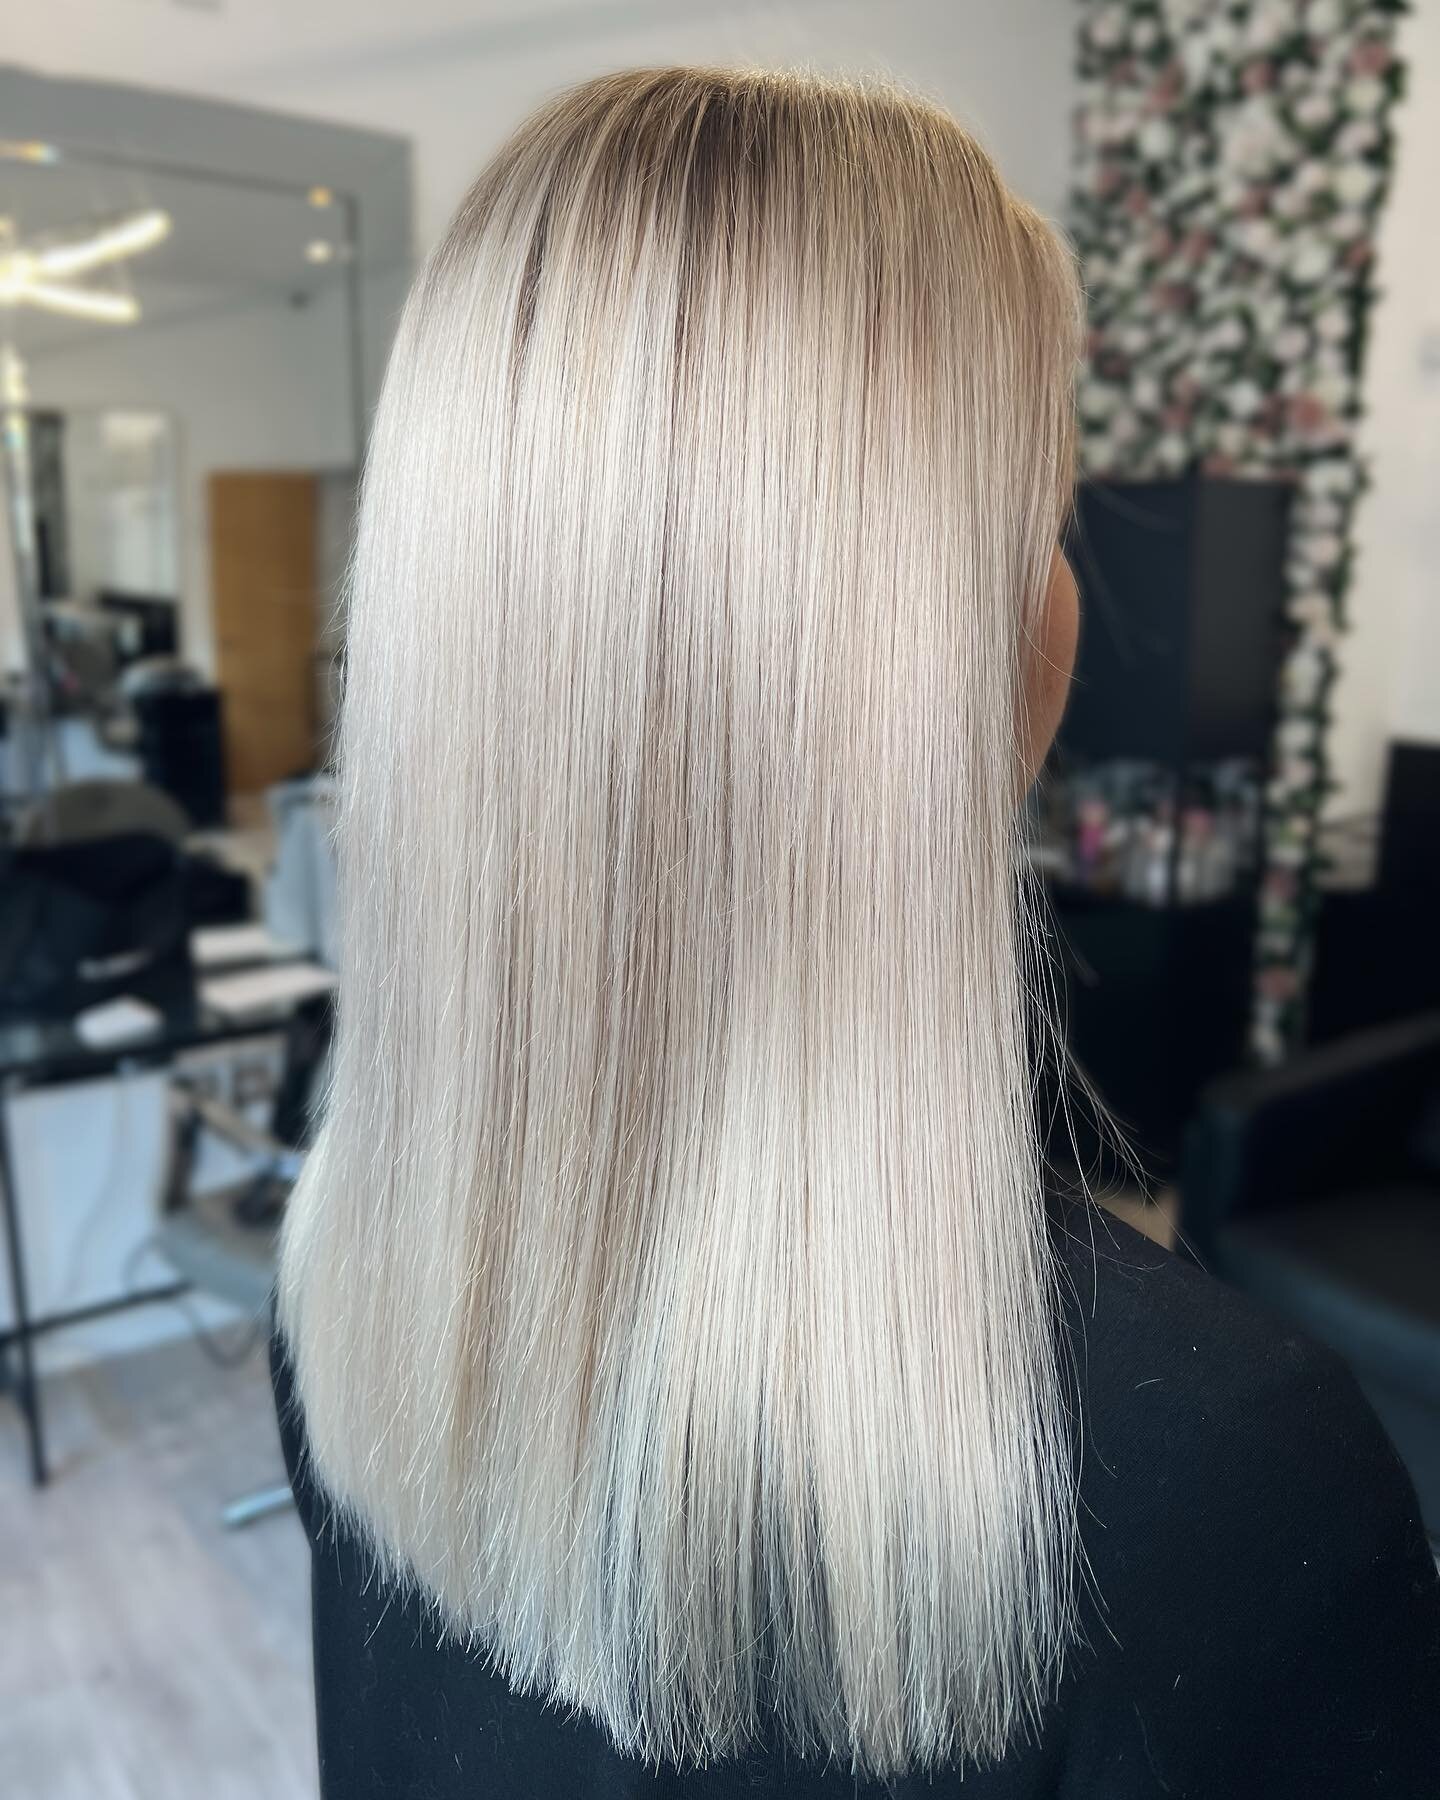 ✨𝐒𝐞𝐫𝐯𝐢𝐜𝐞 𝐁𝐫𝐞𝐚𝐤𝐝𝐨𝐰𝐧 ✨
Service: Half Head Highlights, Toner, Cut + Blow Dry: &pound;205
Pre Lightener: Cream Blonde
Toner: 10.2 
Styling: Instant Blow Out + Thickening Cream
&bull;
&bull;
&bull;
#highlights #balayage #hair #haircolor #h